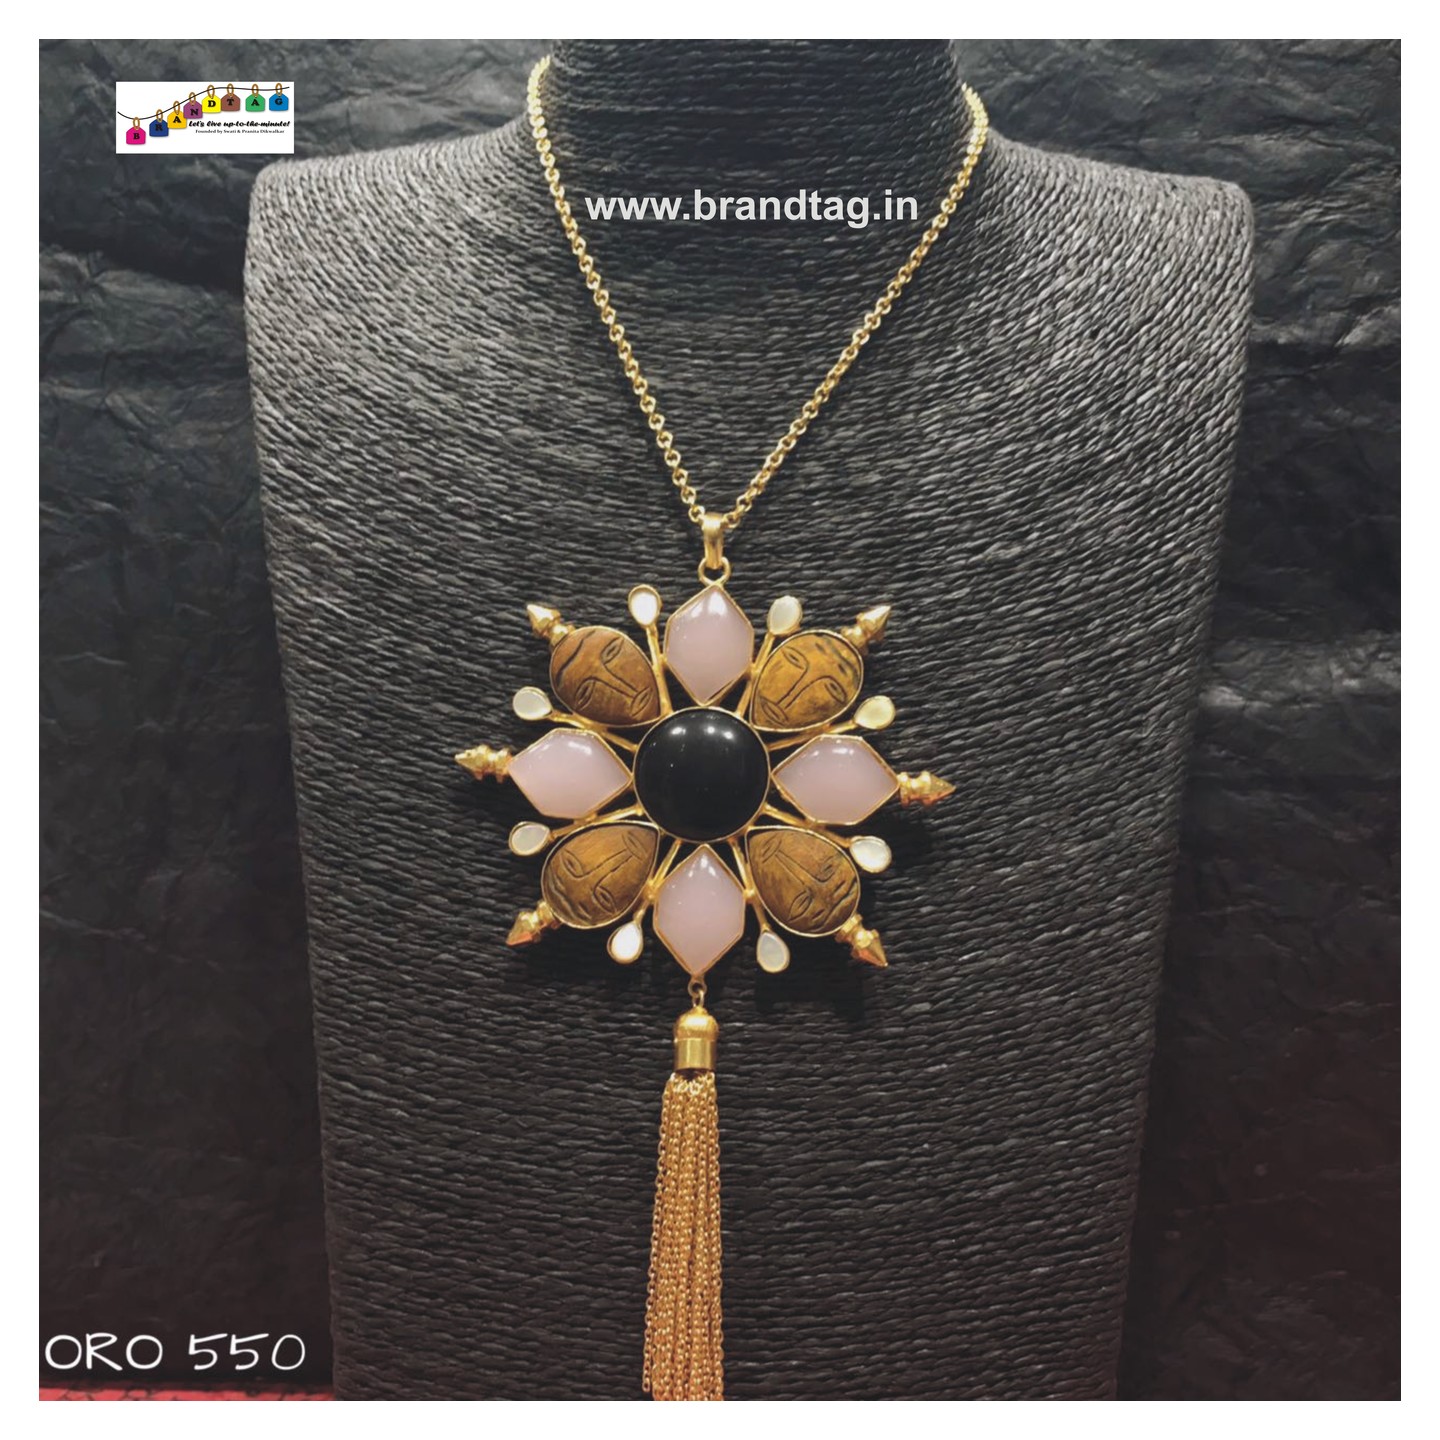 Dussehra Collection... Contemporary Golden Long Ora Necklace!!